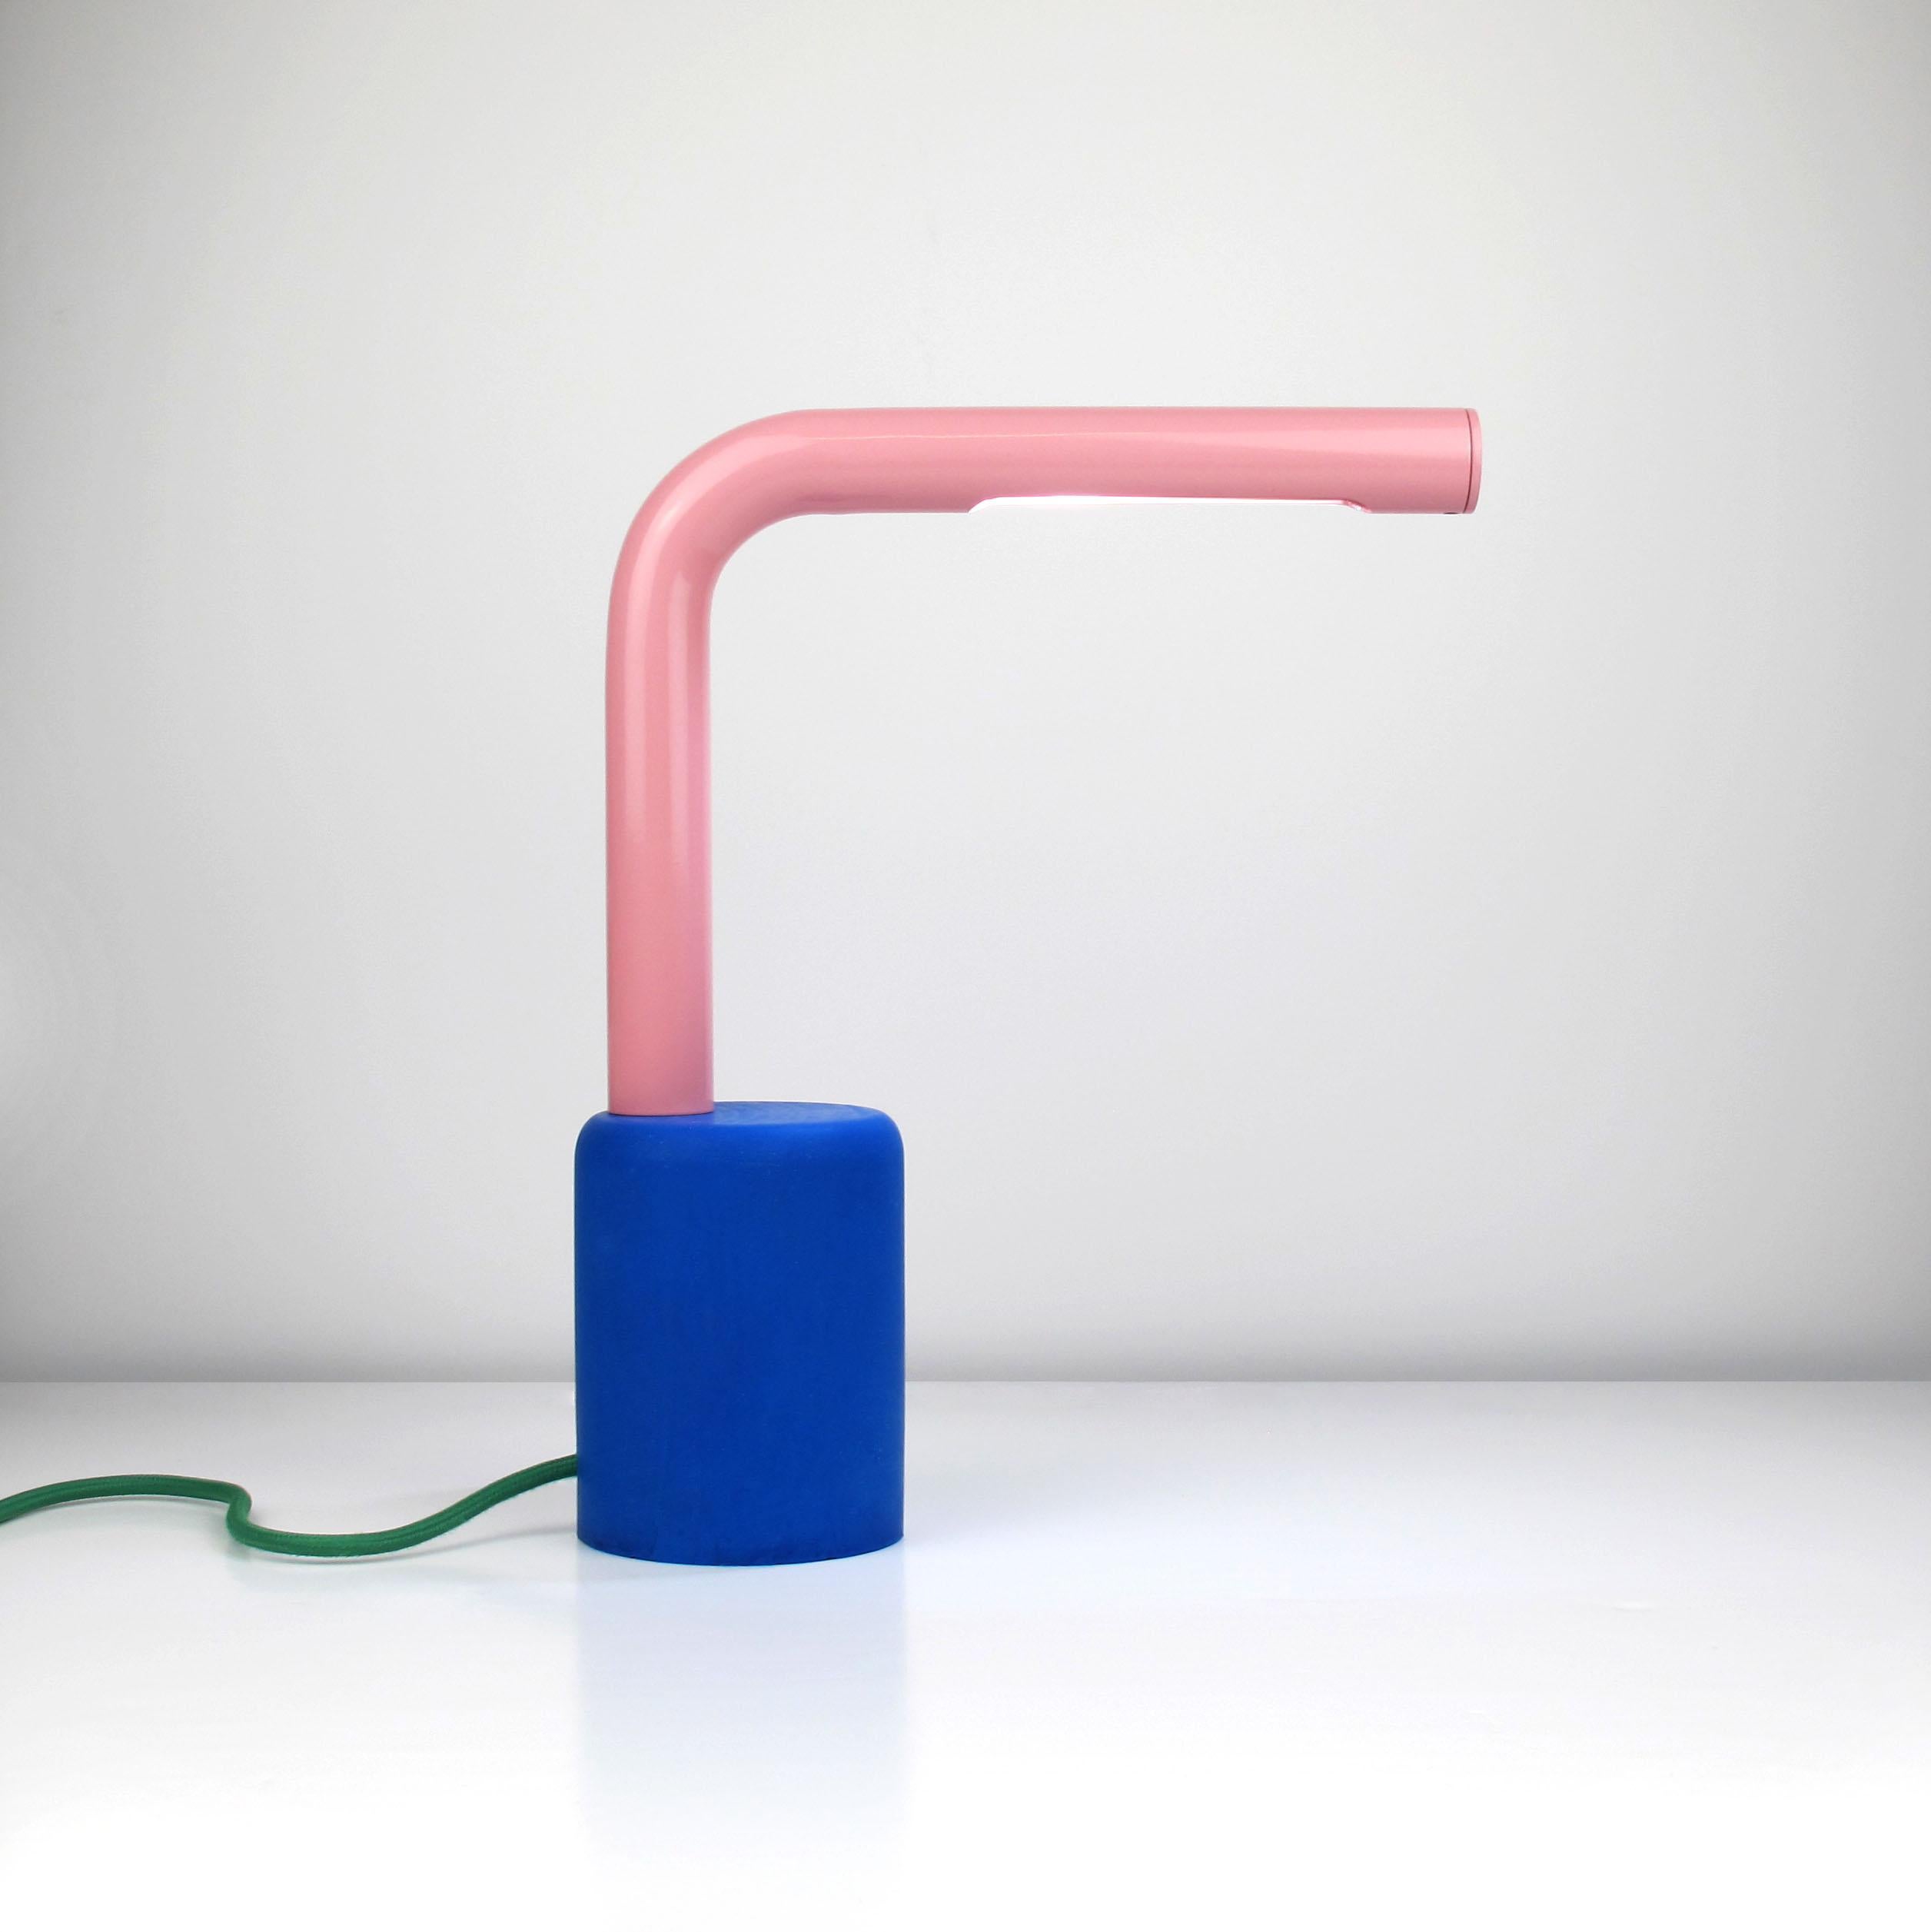 This beautiful and playful table lamp takes influence from postmodernism as well as many other objects around us.

All individually handmade to order, the tube can come in a range of RAL colors, cable colors and you can choose between a concrete